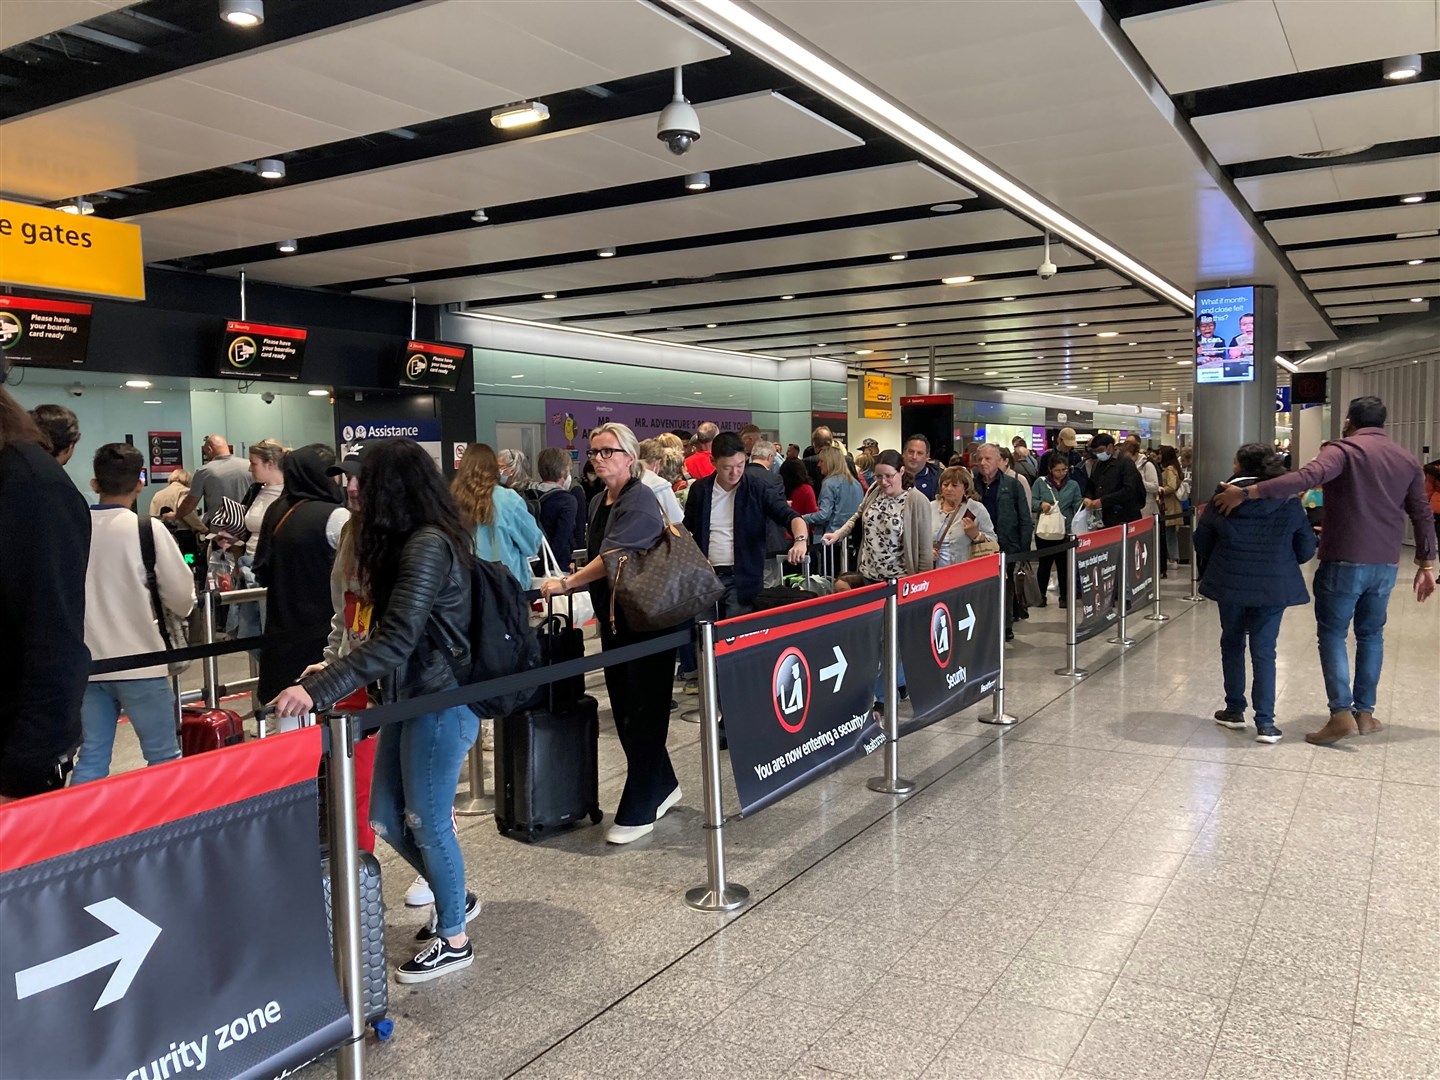 Passengers queue for flights at Heathrow Airport (Ben Smith/PA)